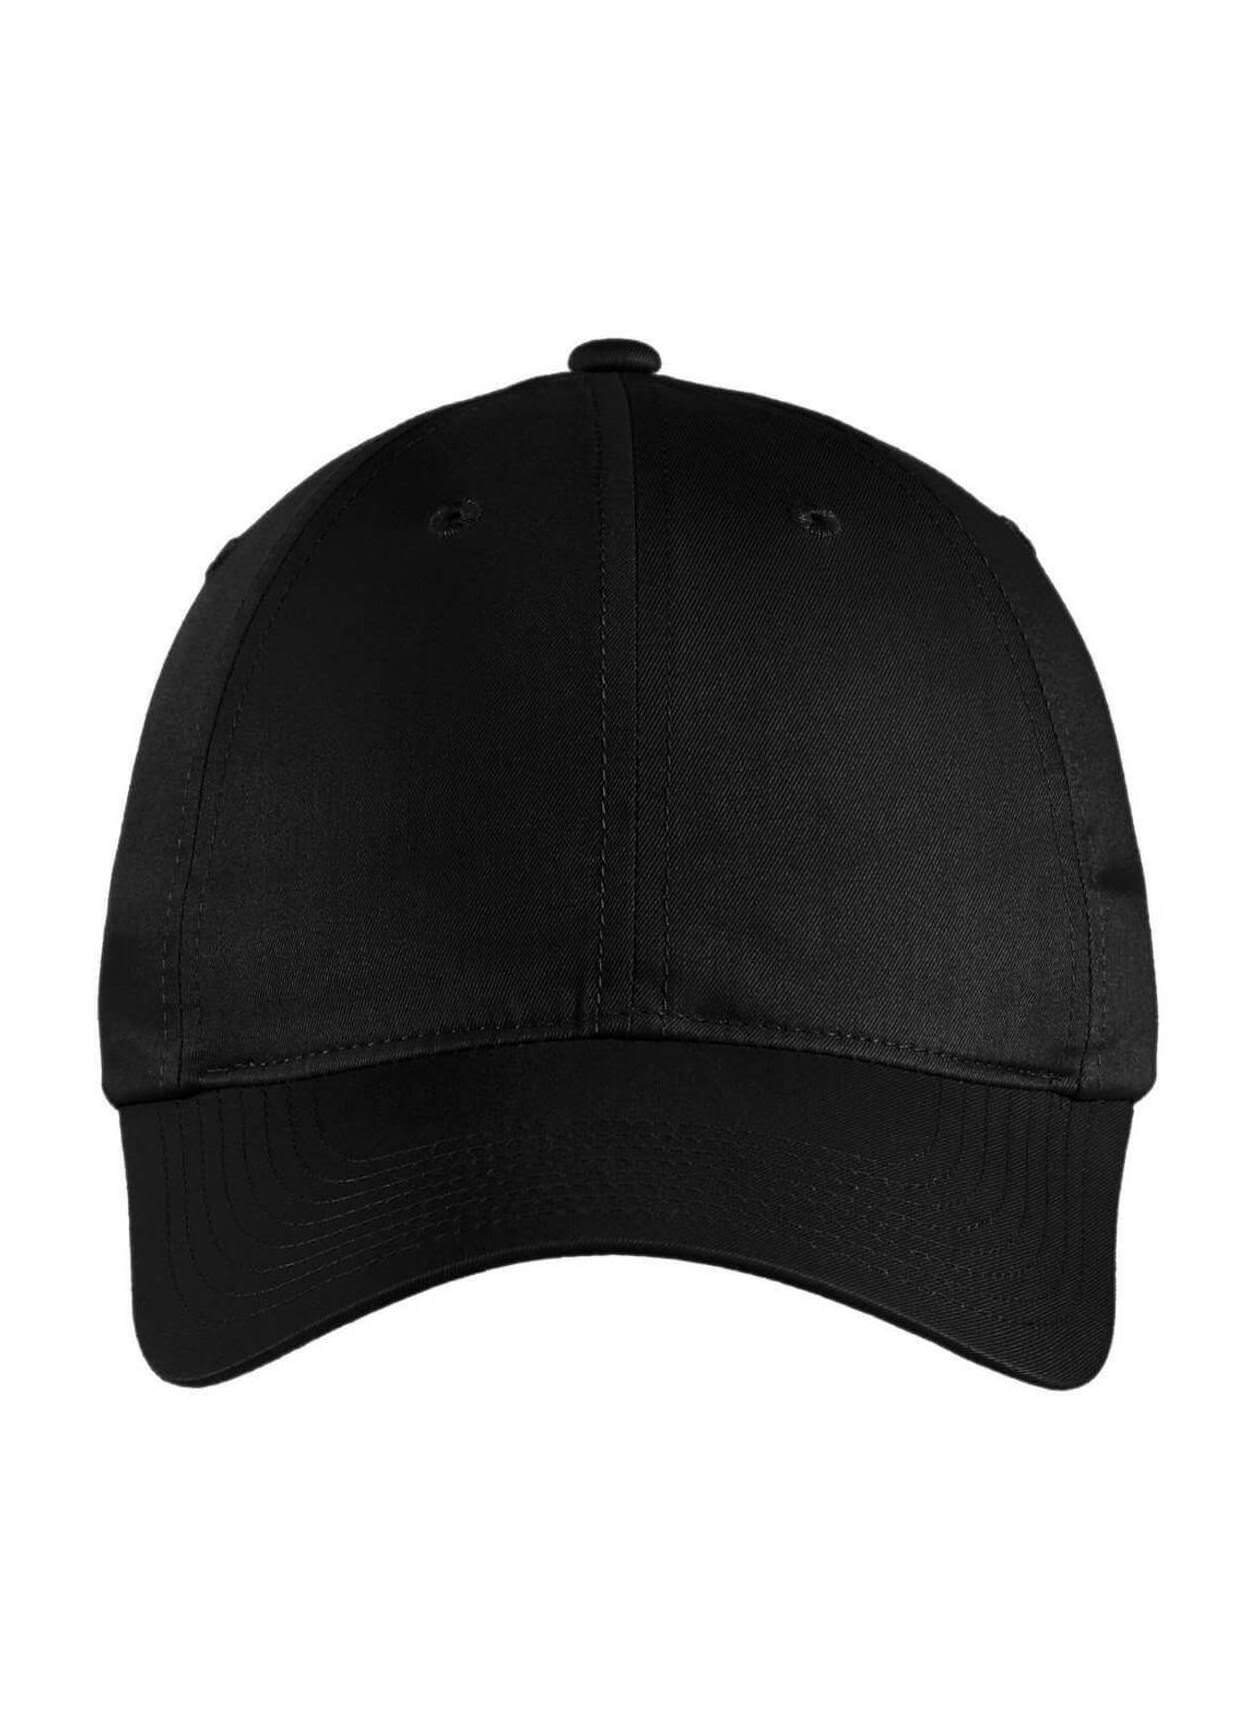 Nike Deep Black Unstructured Twill Hat